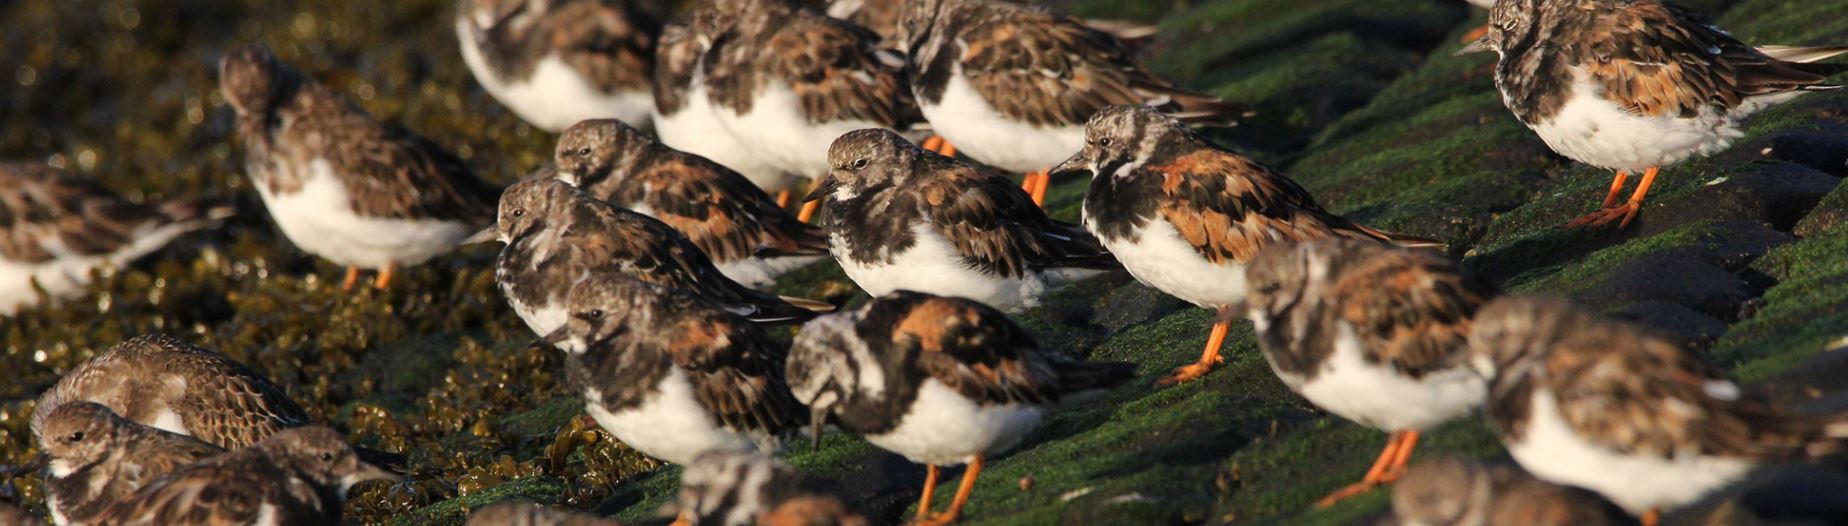 By studying ducks, Becky Poulson has learned that avian influenza viruses can stay alive and infectious outside their hosts for as long as seven months. Now she’s working with migratory shorebirds like these ruddy turnstones to determine the impact of live virus deposited through the birds’ droppings as they move about the Eastern seaboard.